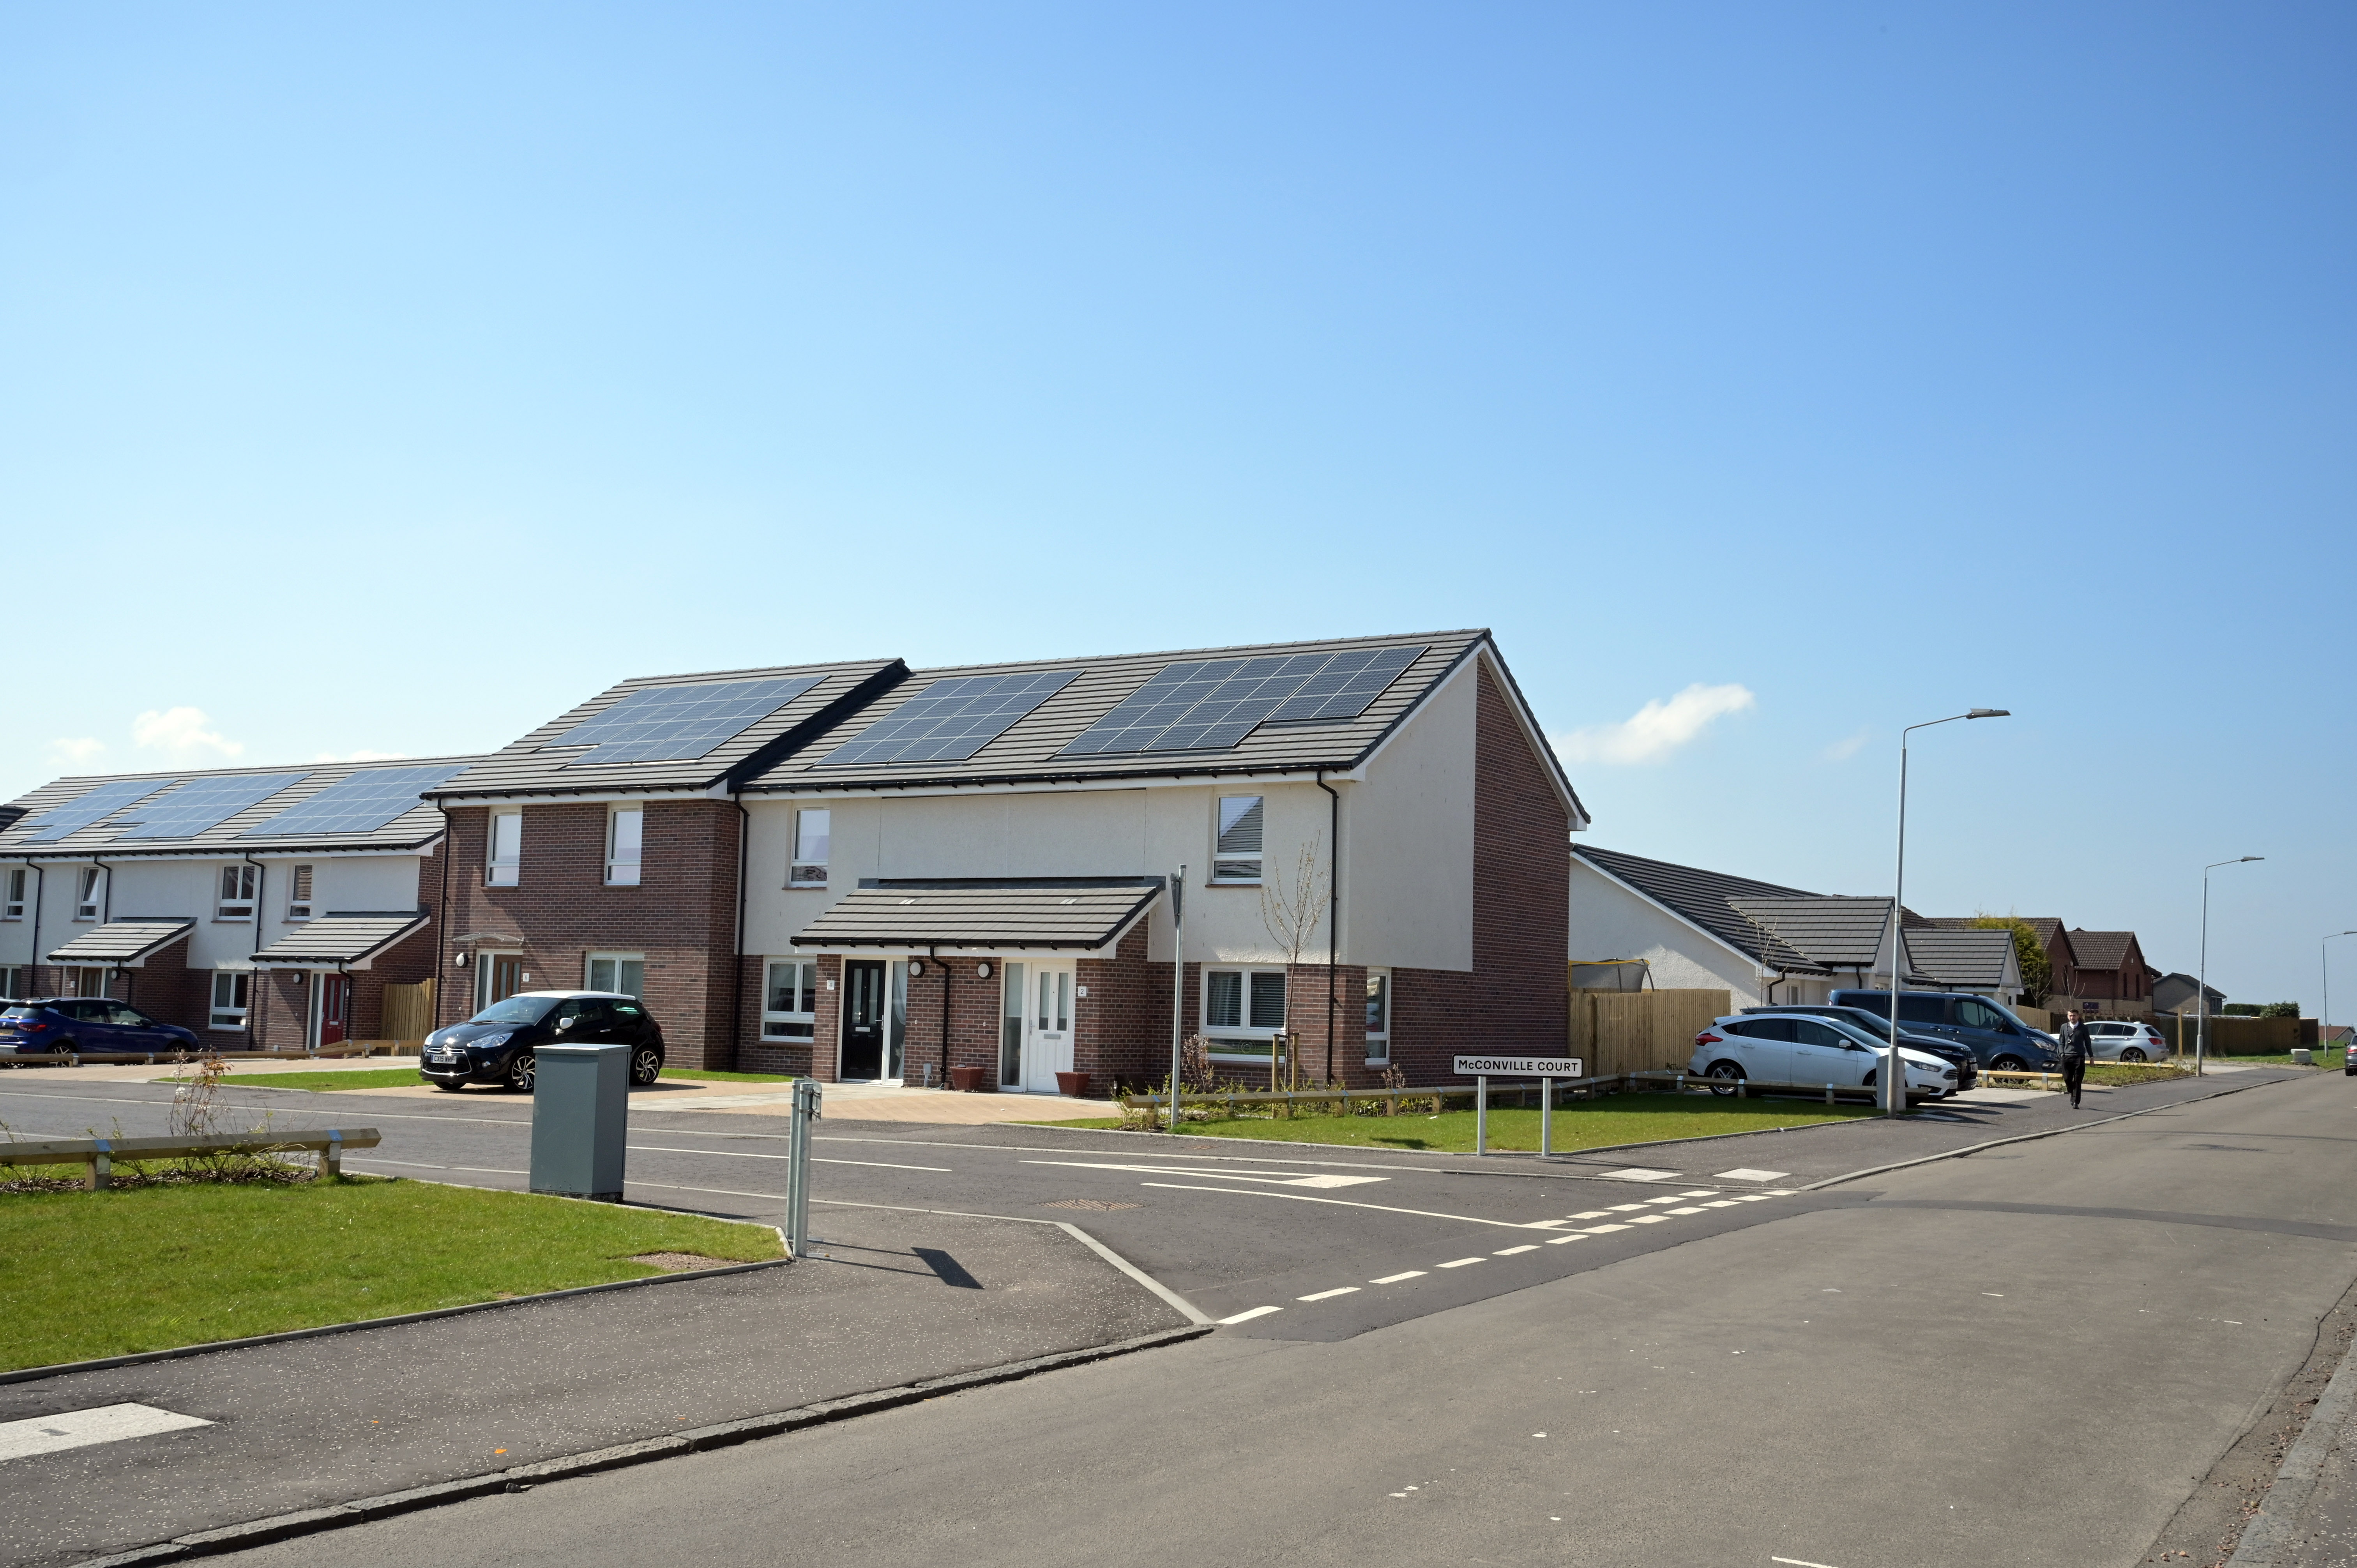 Tenants move into new council homes in Bellshill